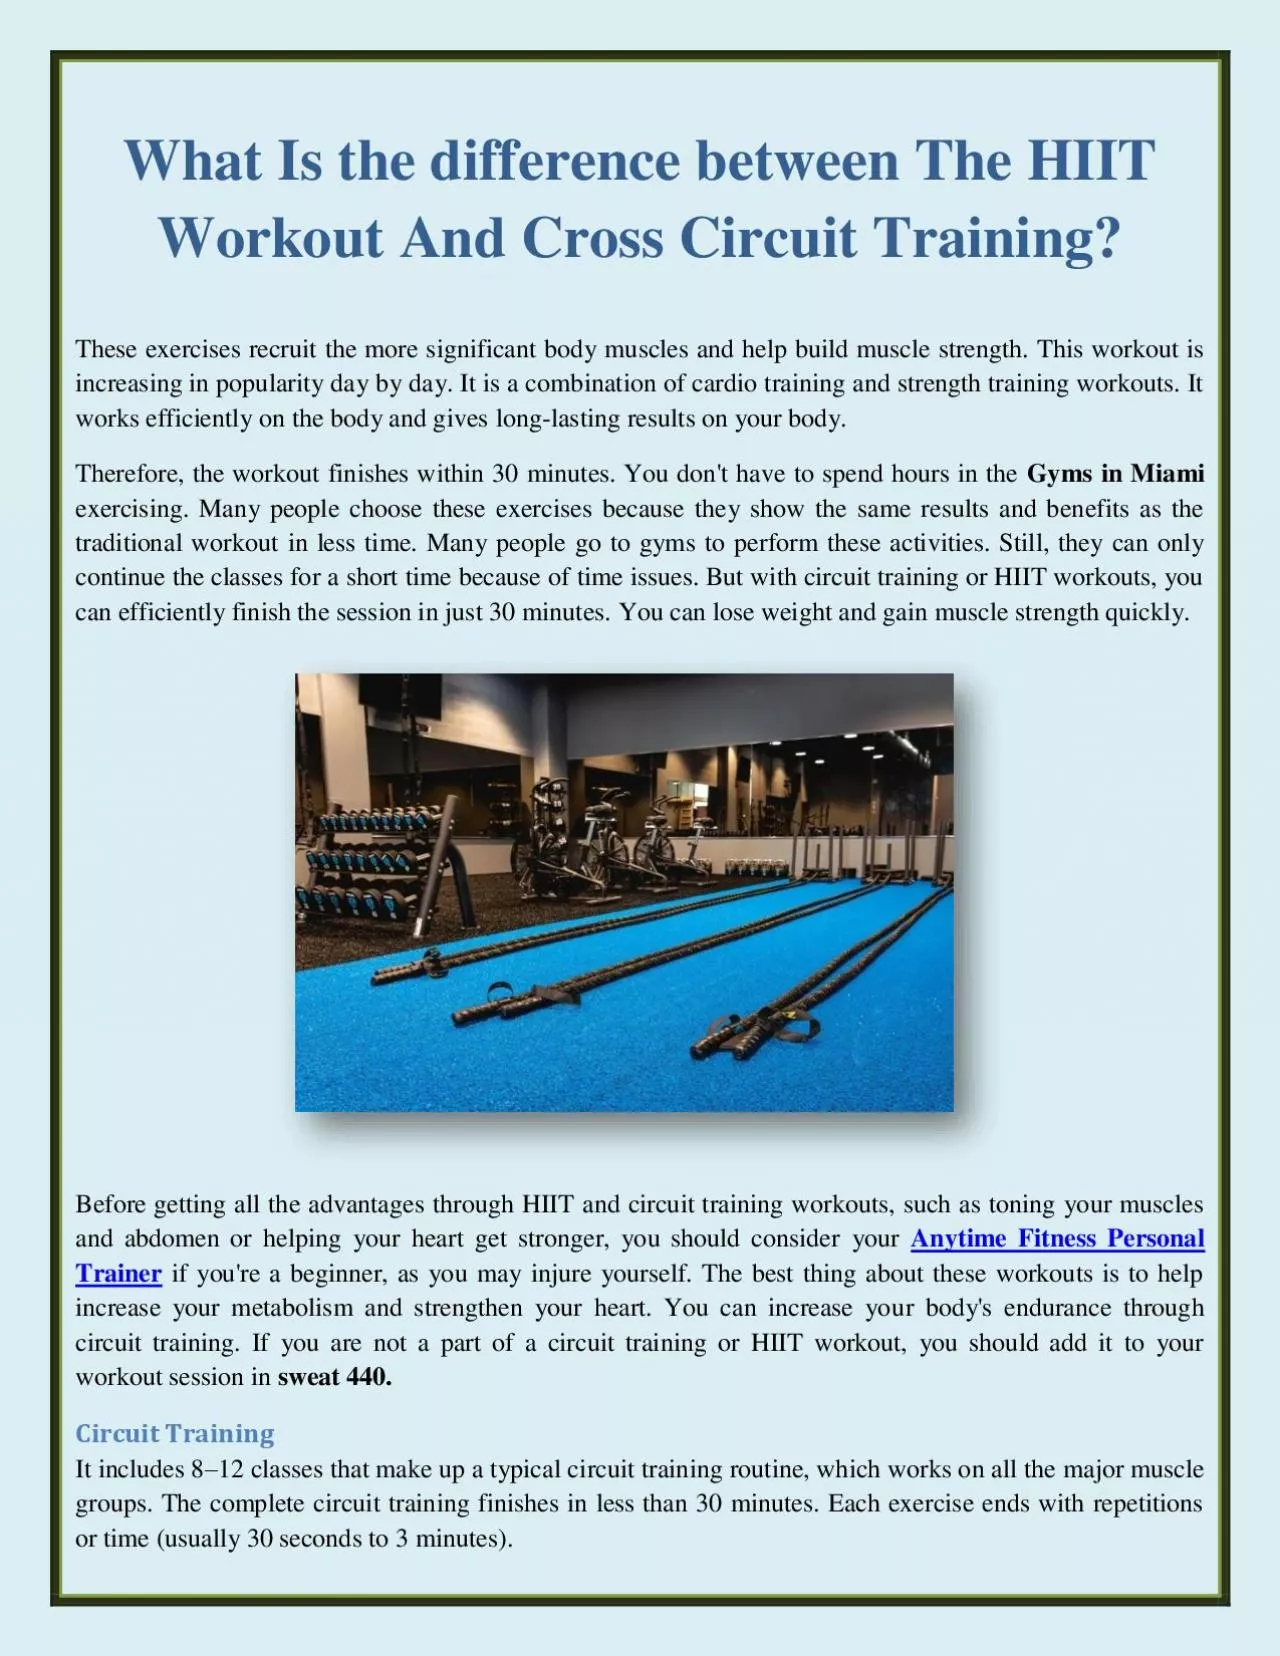 What Is the difference between The HIIT Workout And Cross Circuit Training?